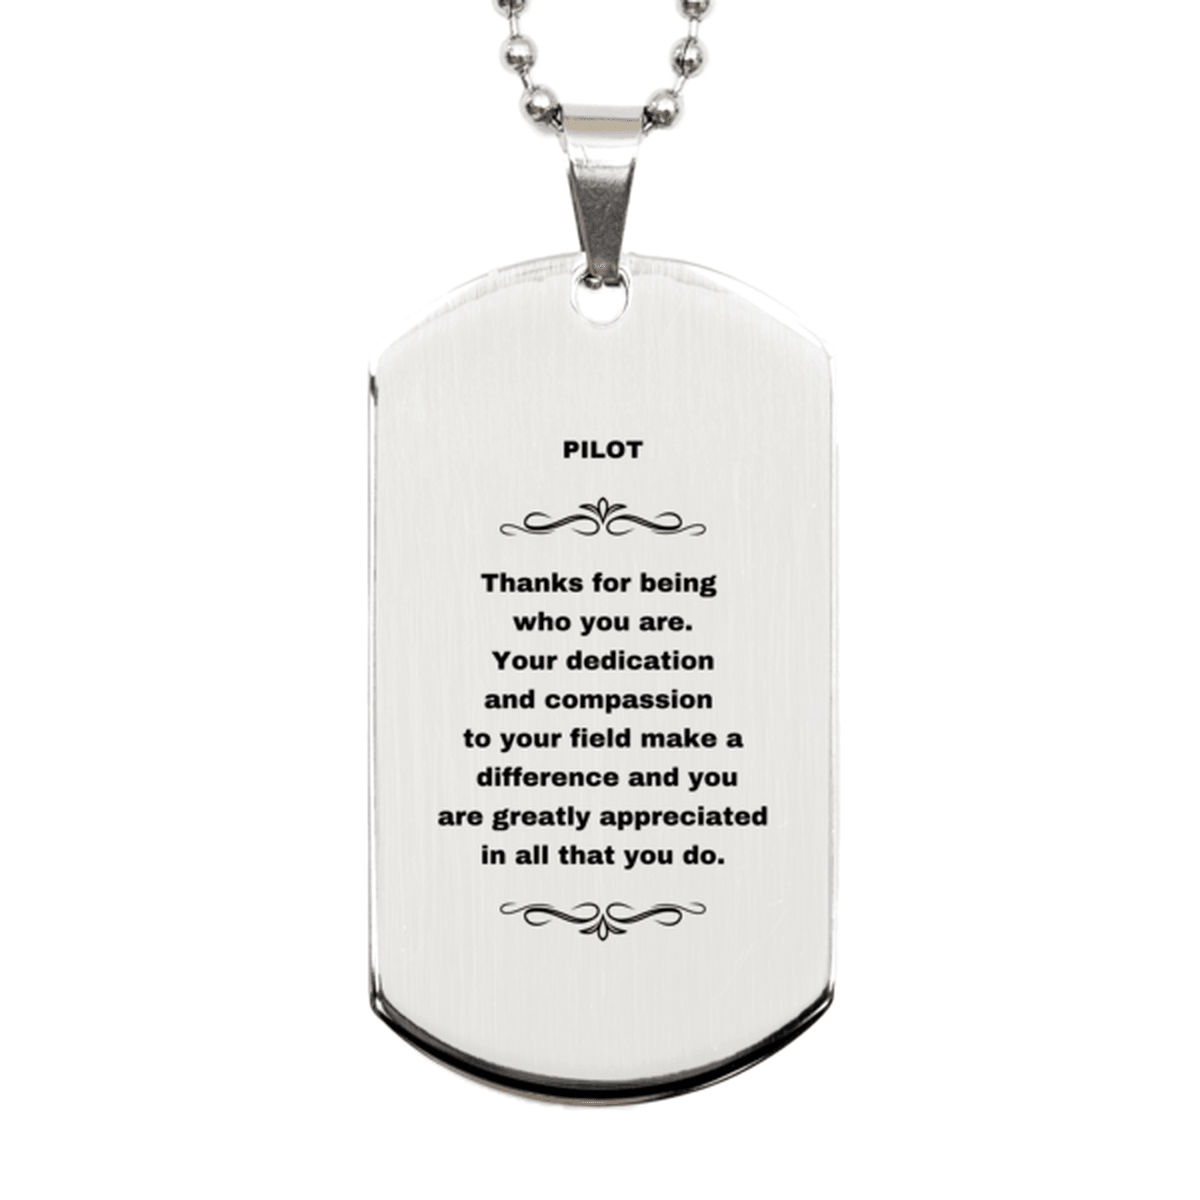 Pilot Silver Dog Tag Engraved Necklace - Thanks for being who you are - Birthday Christmas Jewelry Gifts Coworkers Colleague Boss - Mallard Moon Gift Shop